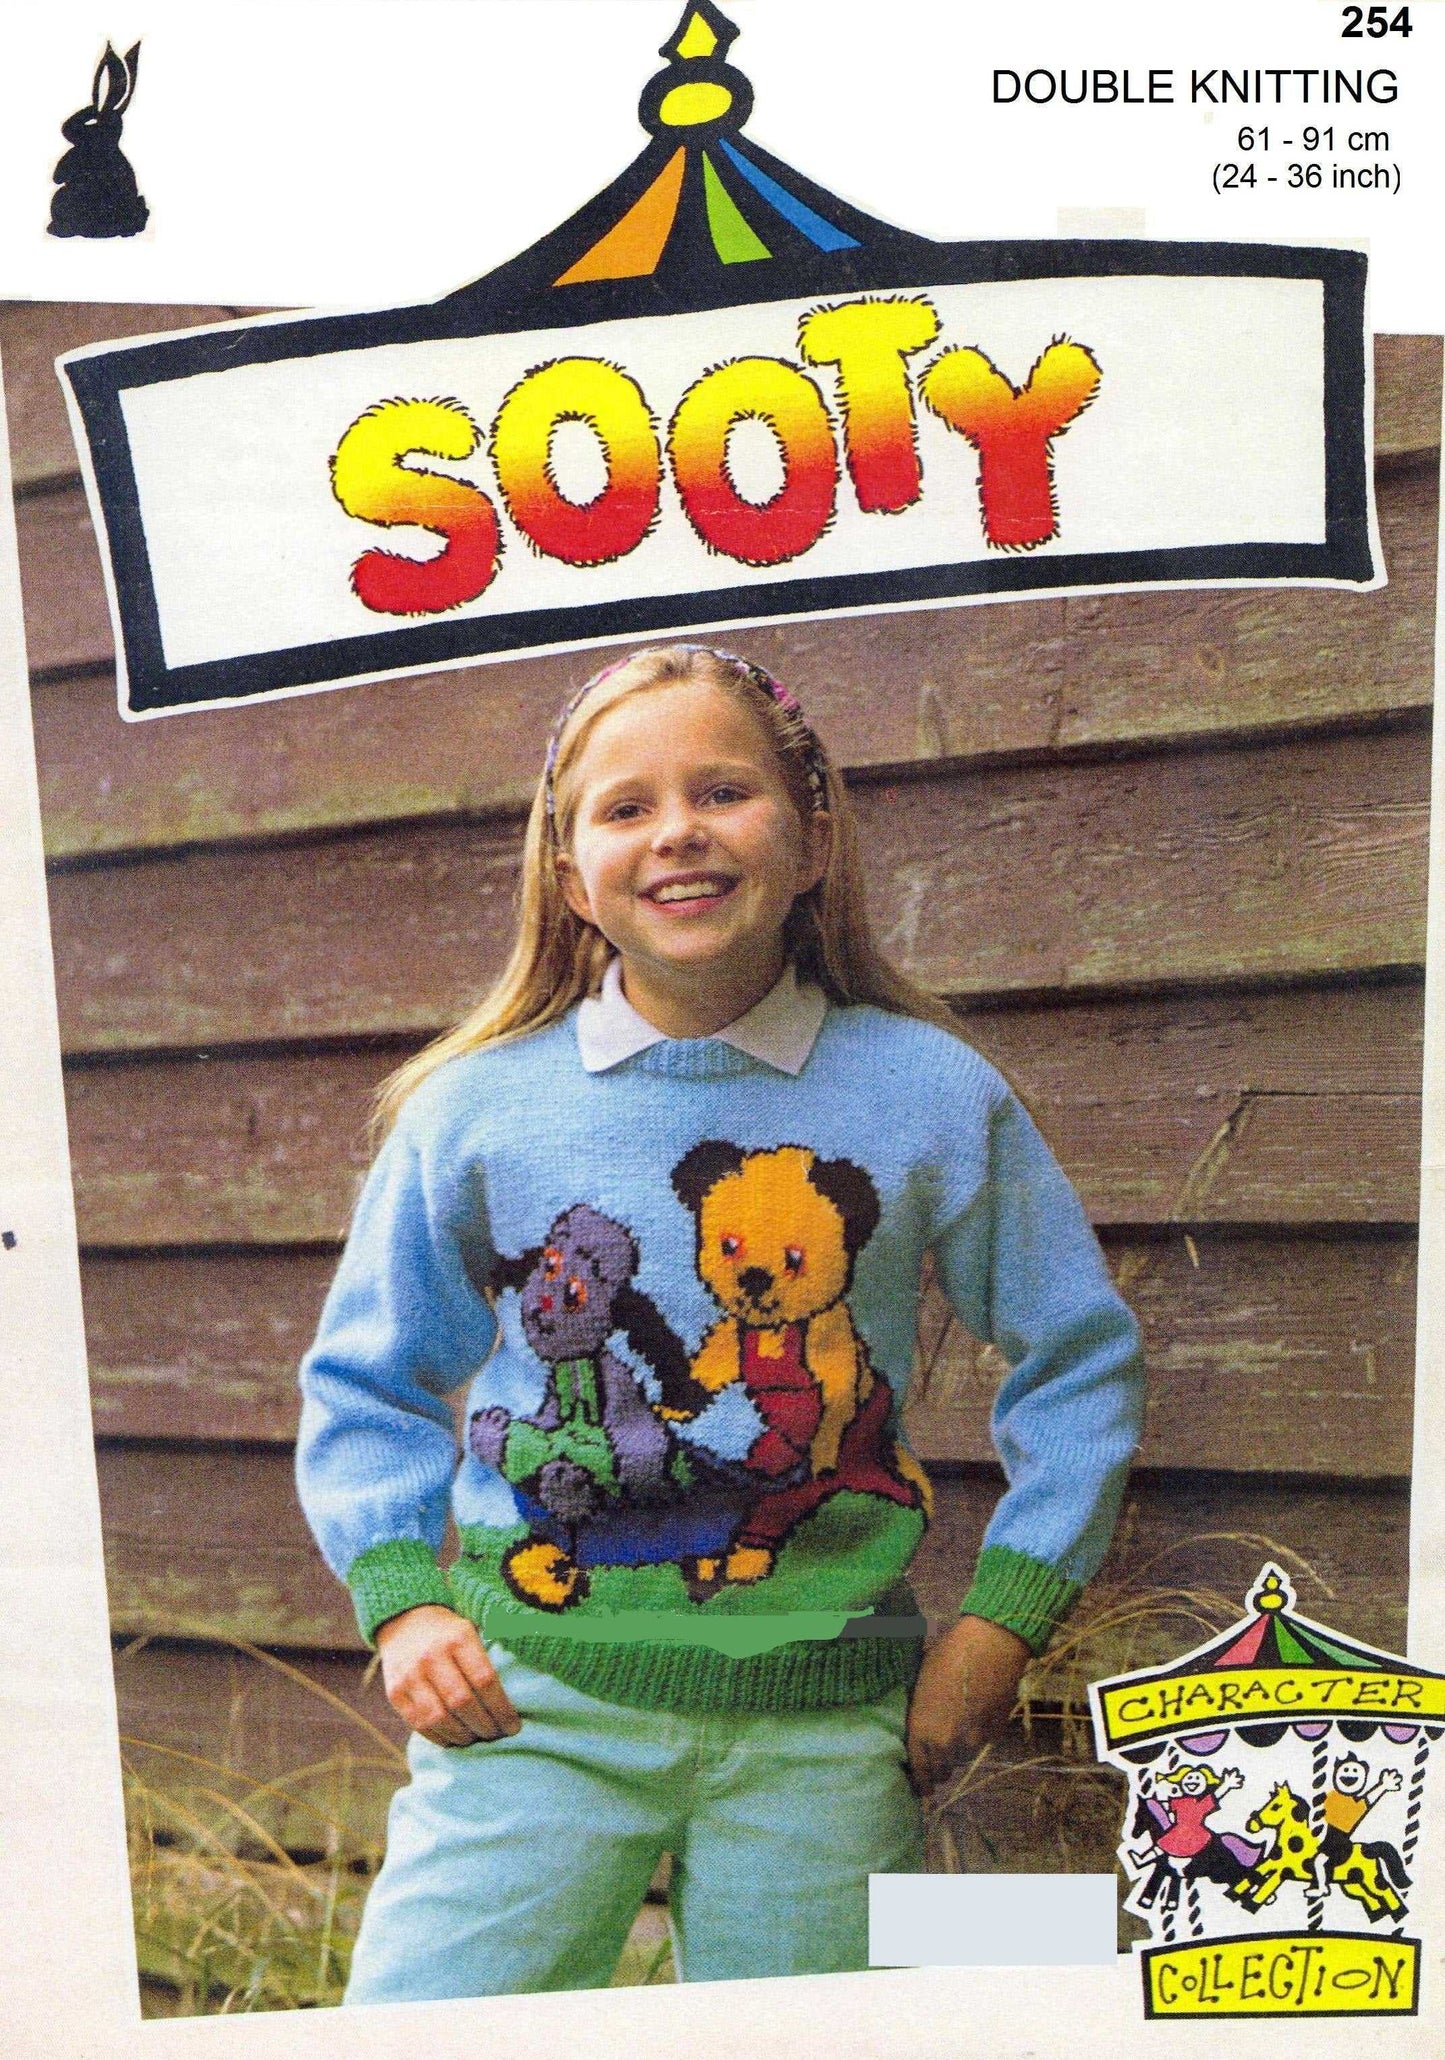  Sooty and Sweep Jumper Knitting Pattern by Cross Stitch Chart Heaven sold by Free Spirit Accessories